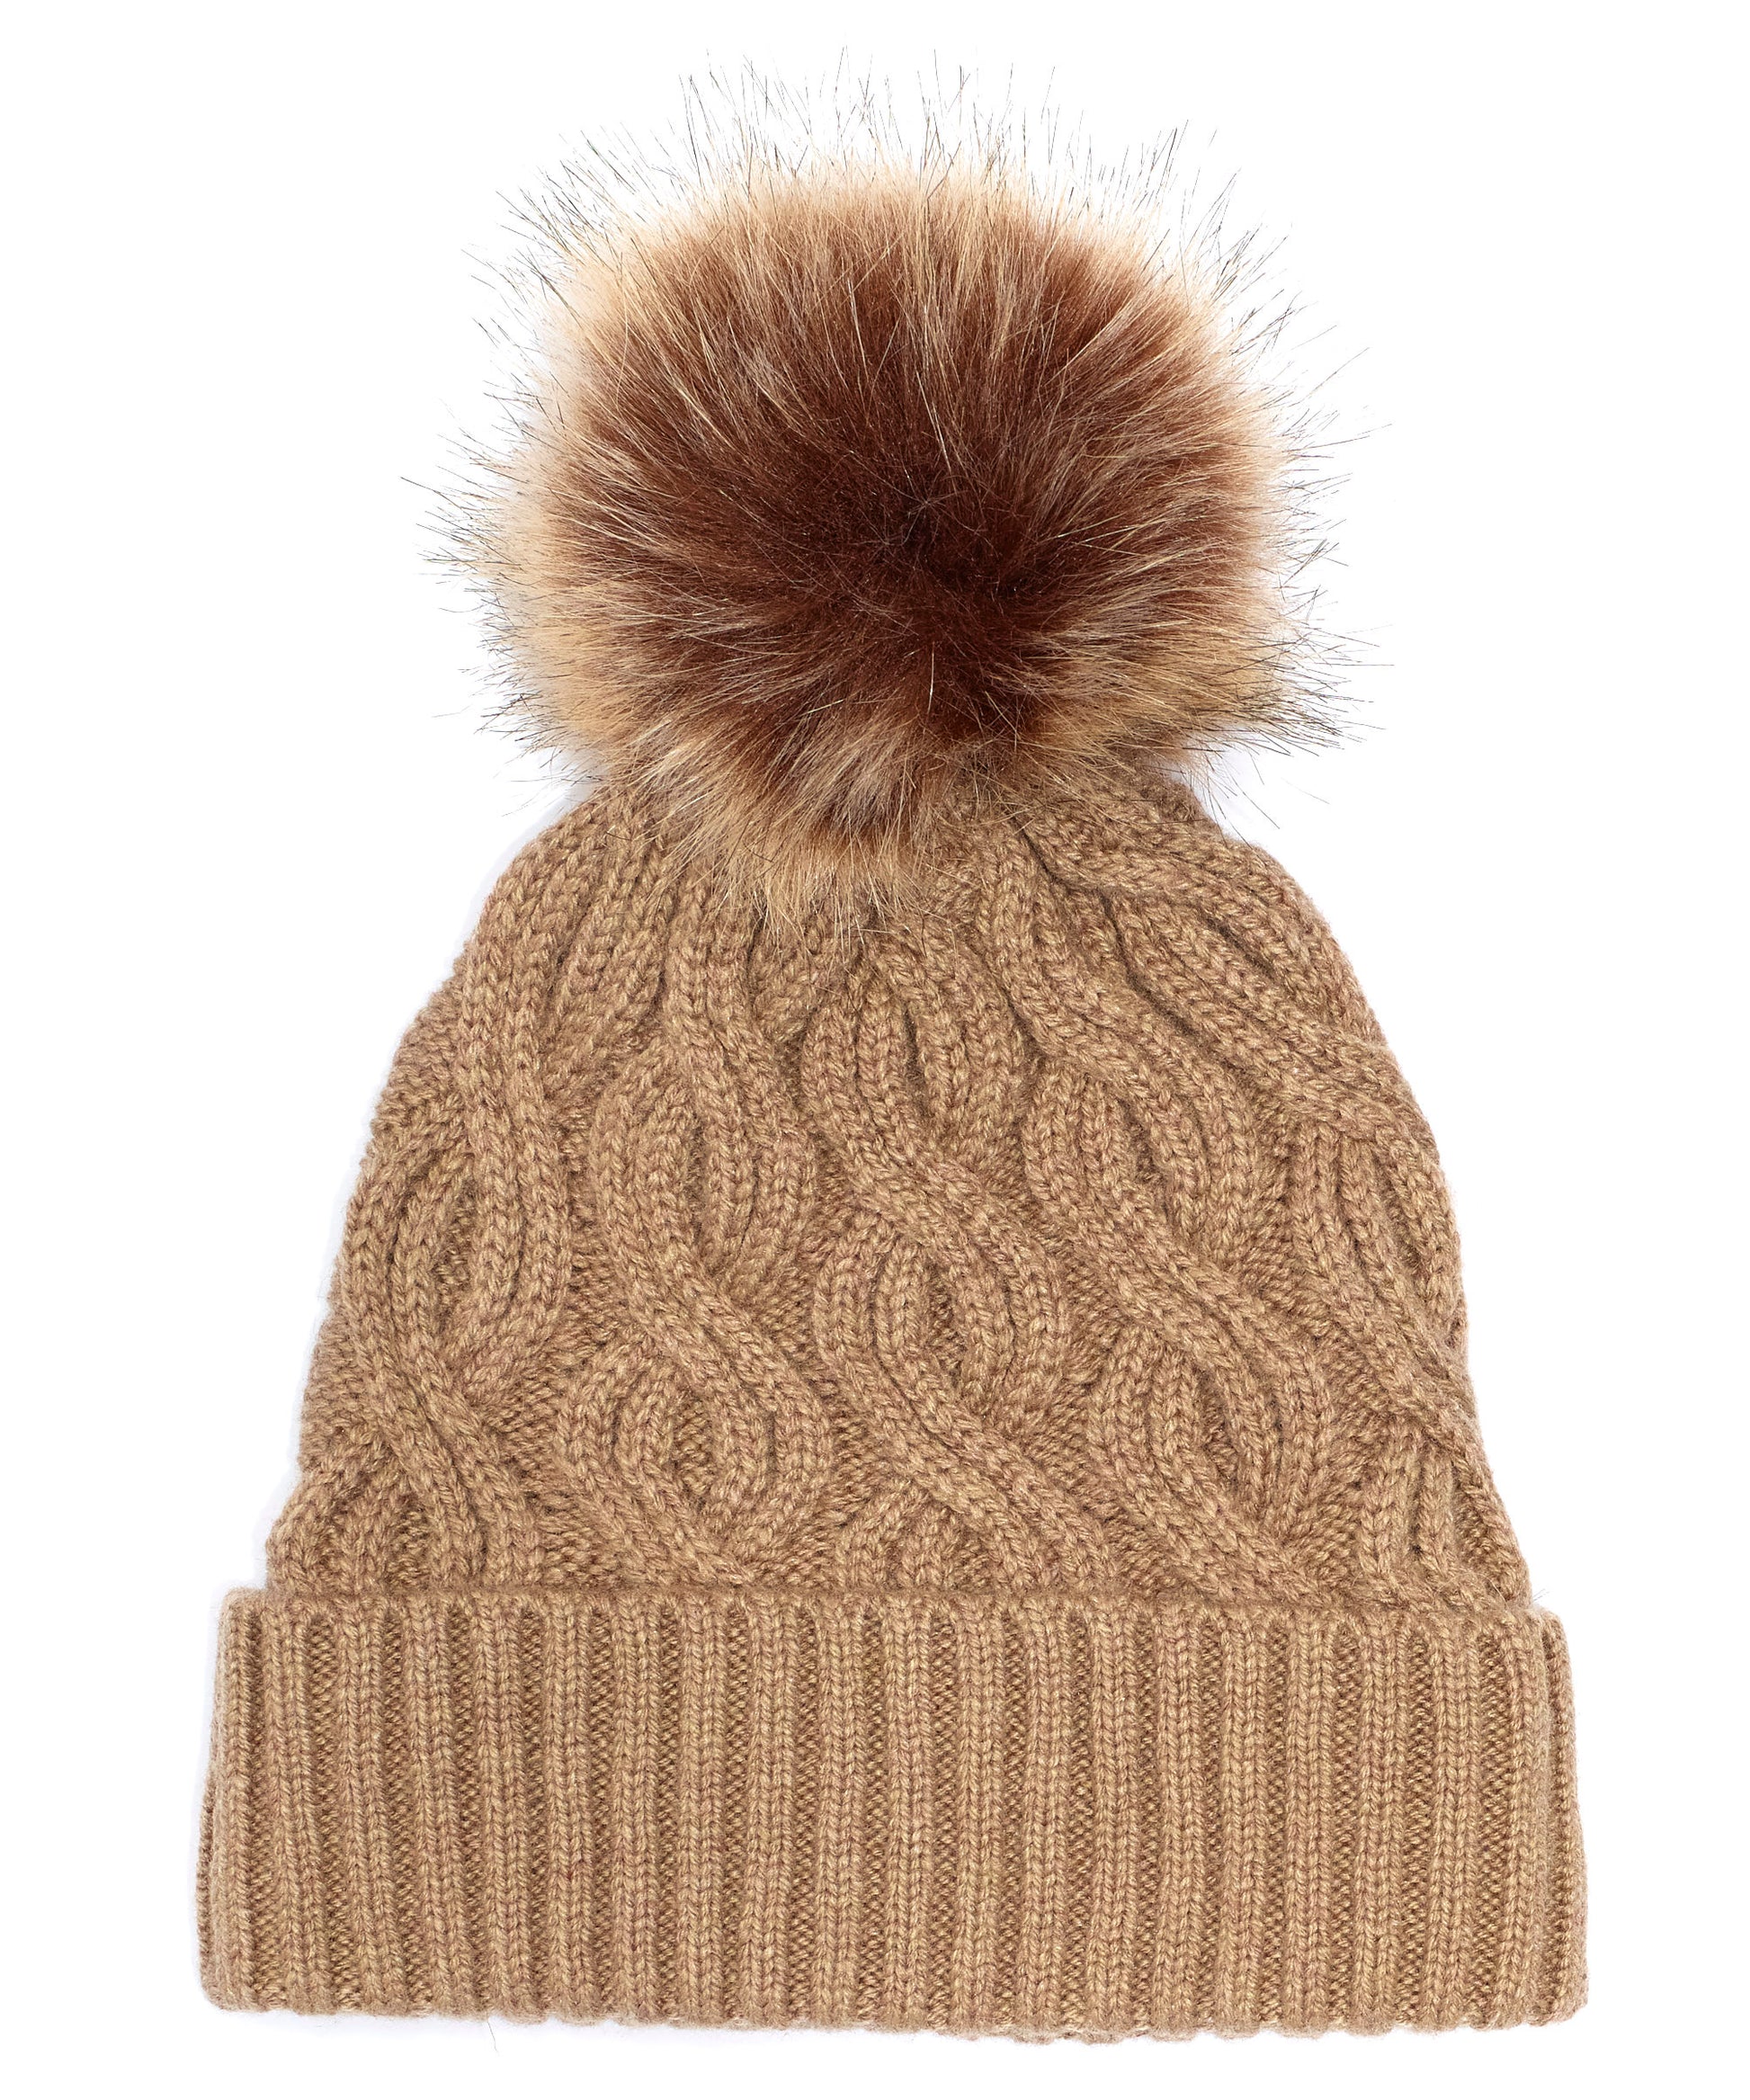 Recycled Pom Hat in color Camel Heather